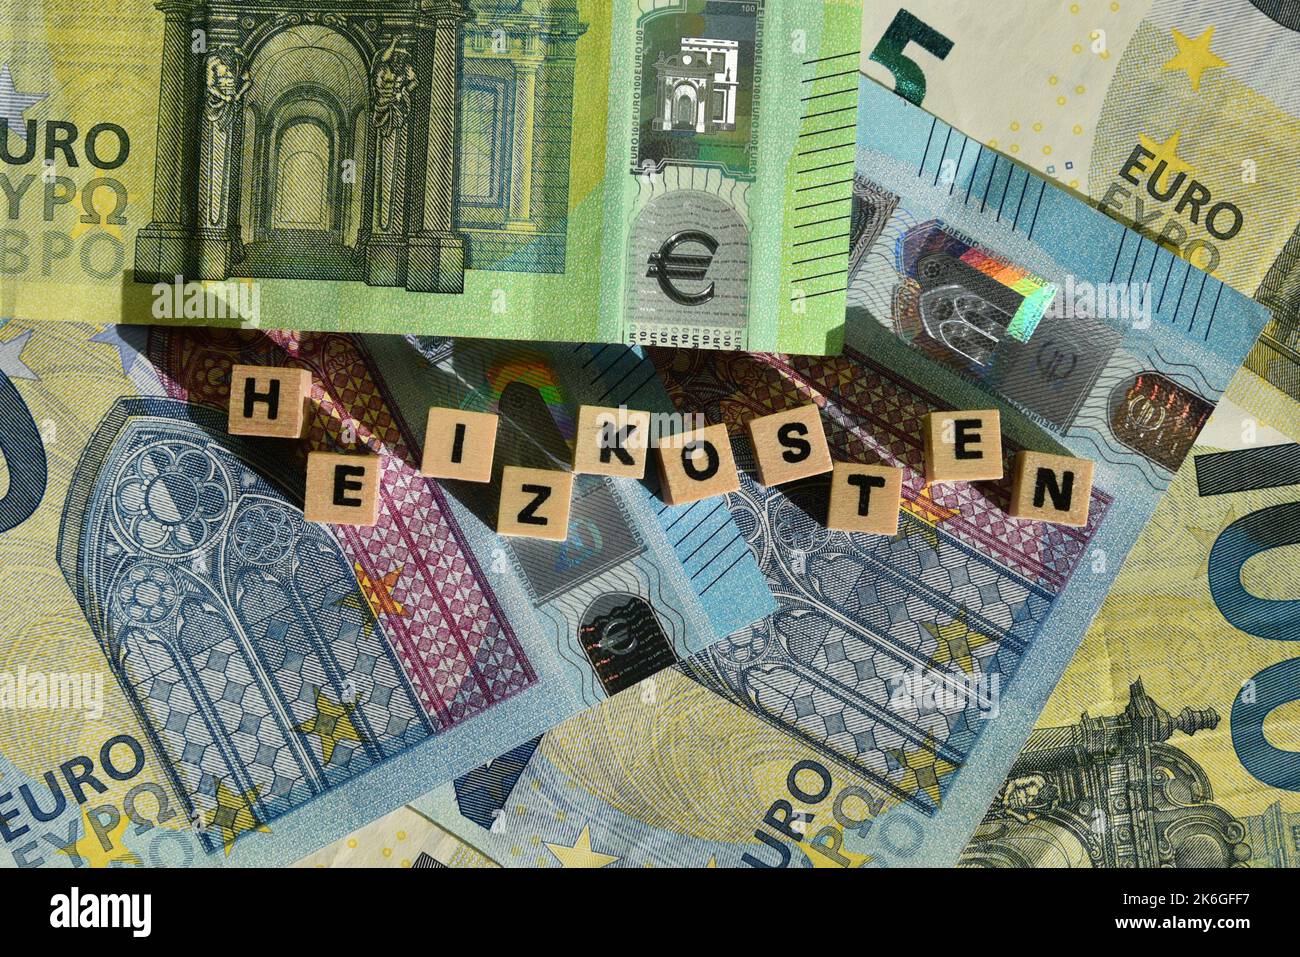 the german word for heating costs with wodden cubes and euro bills Stock Photo